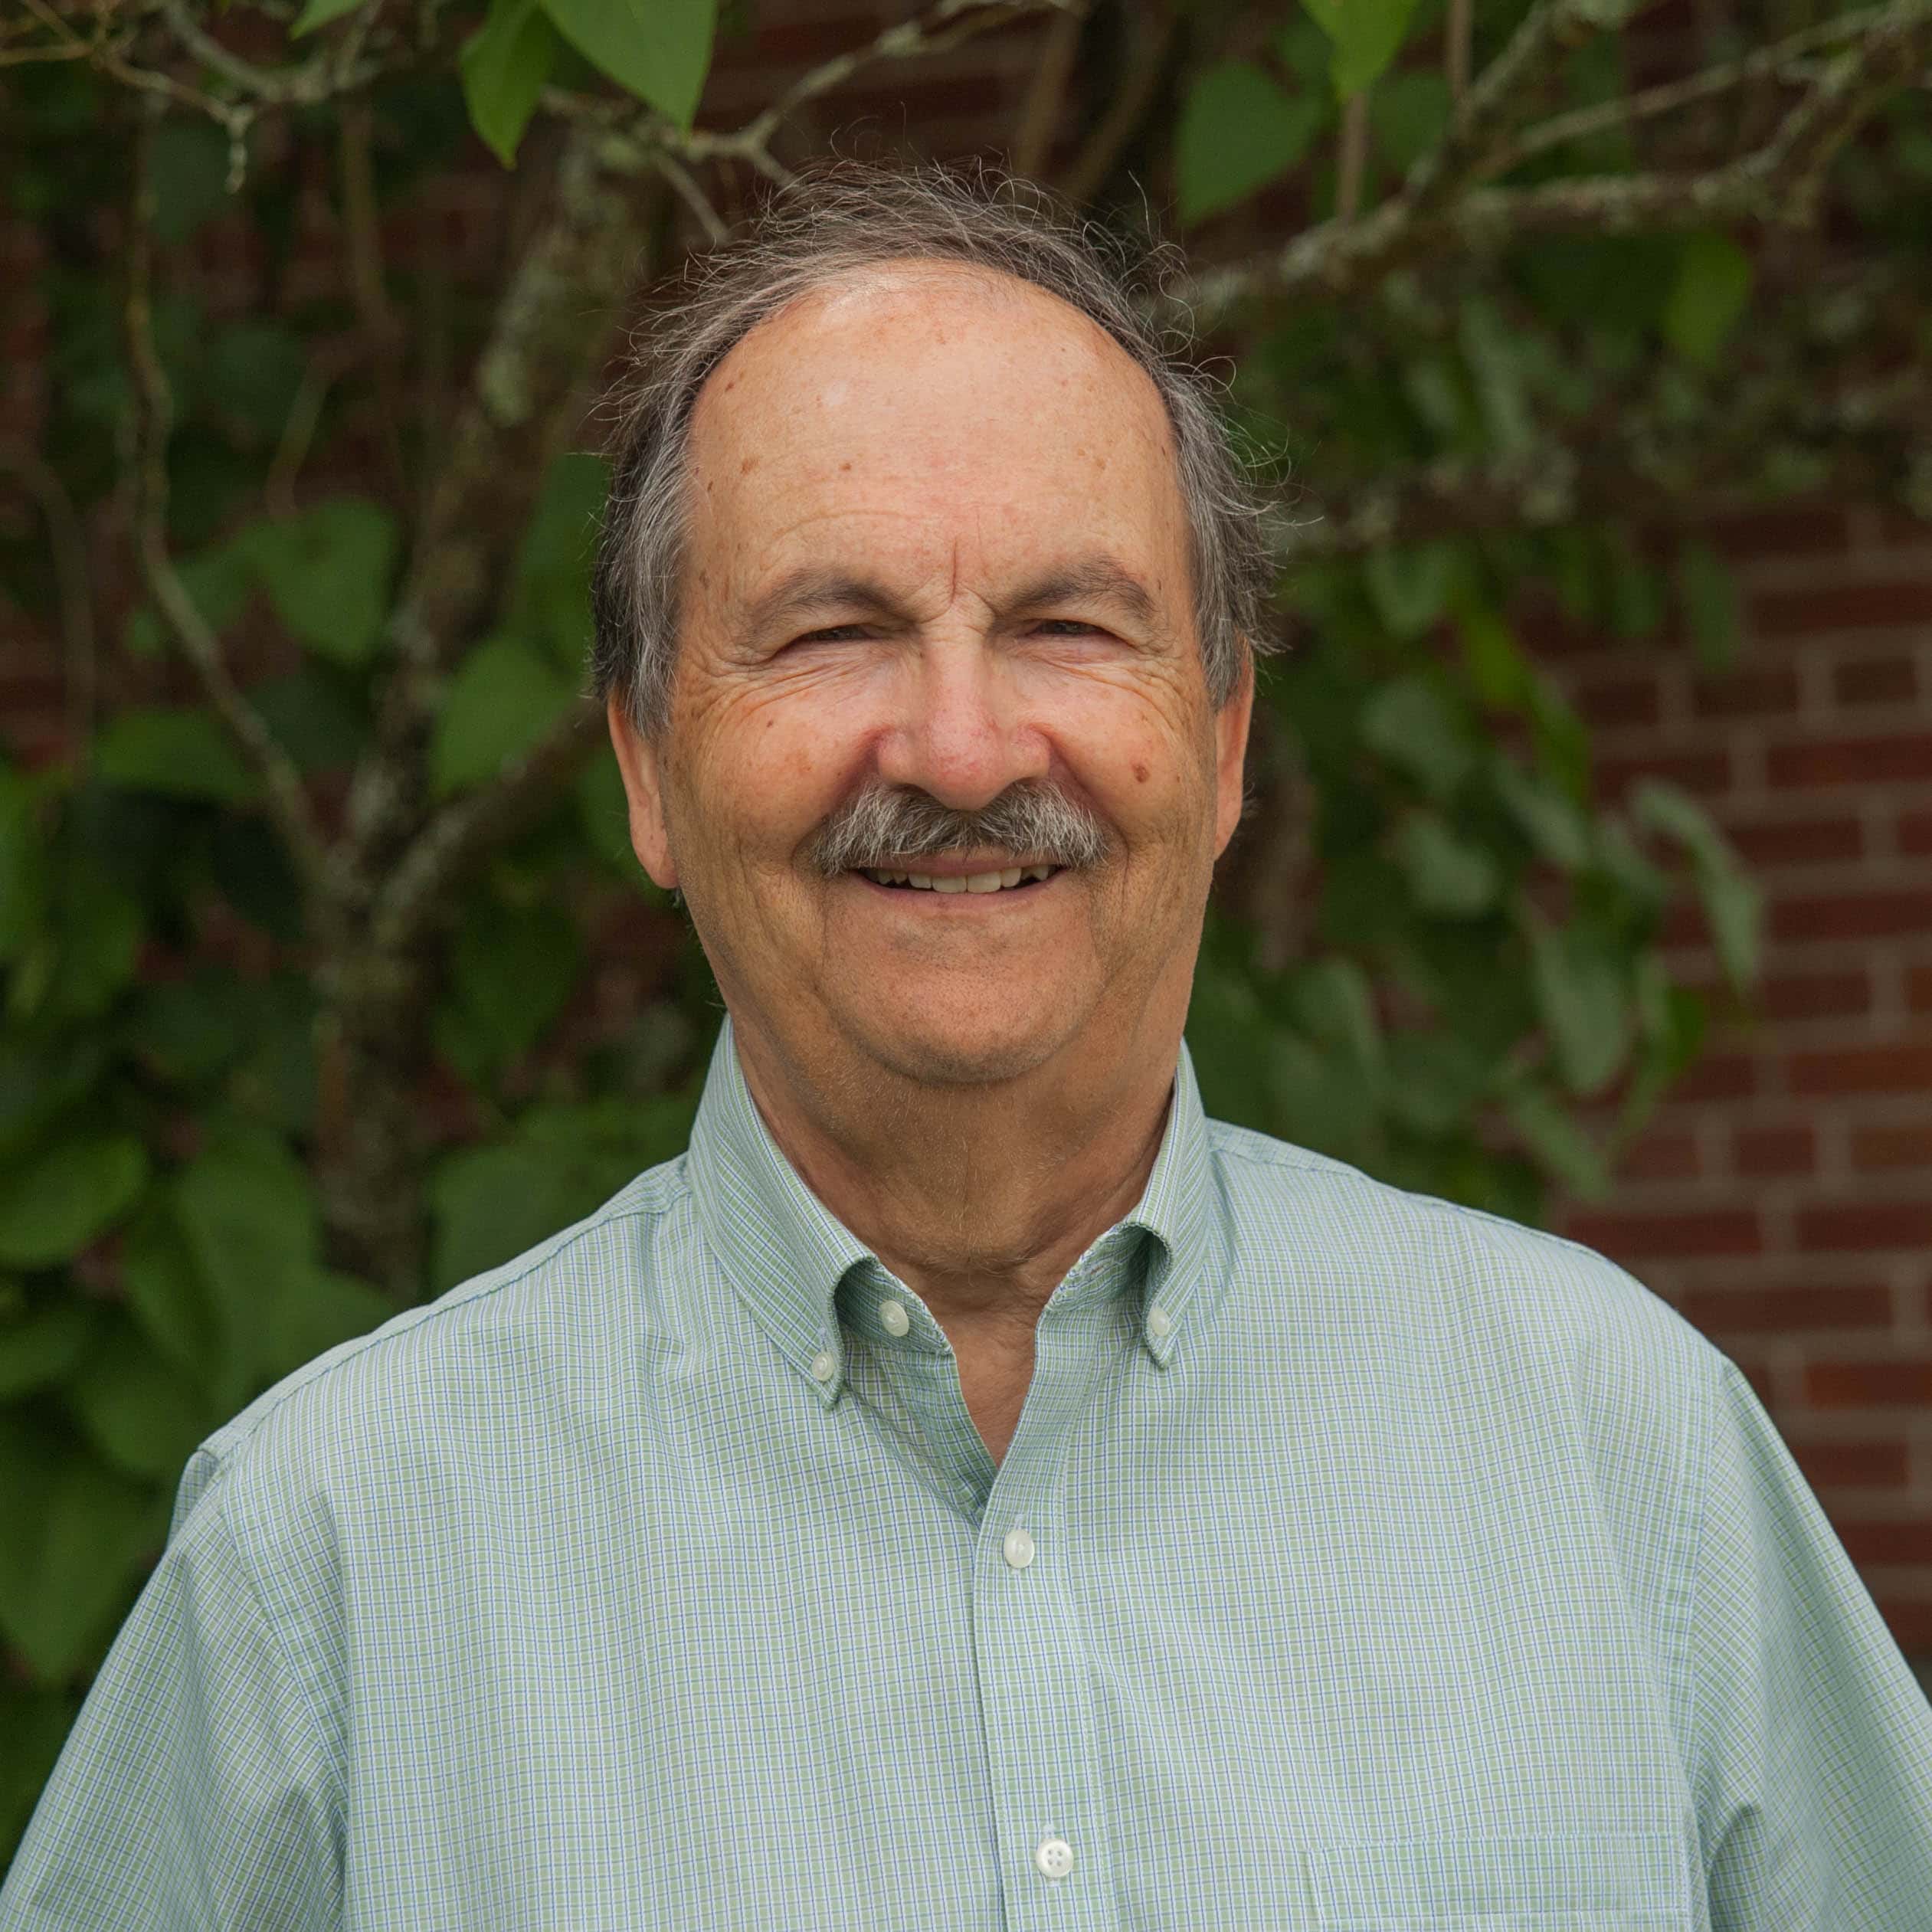 Man in light green shirt smiles at the camera with a brick wall in the background